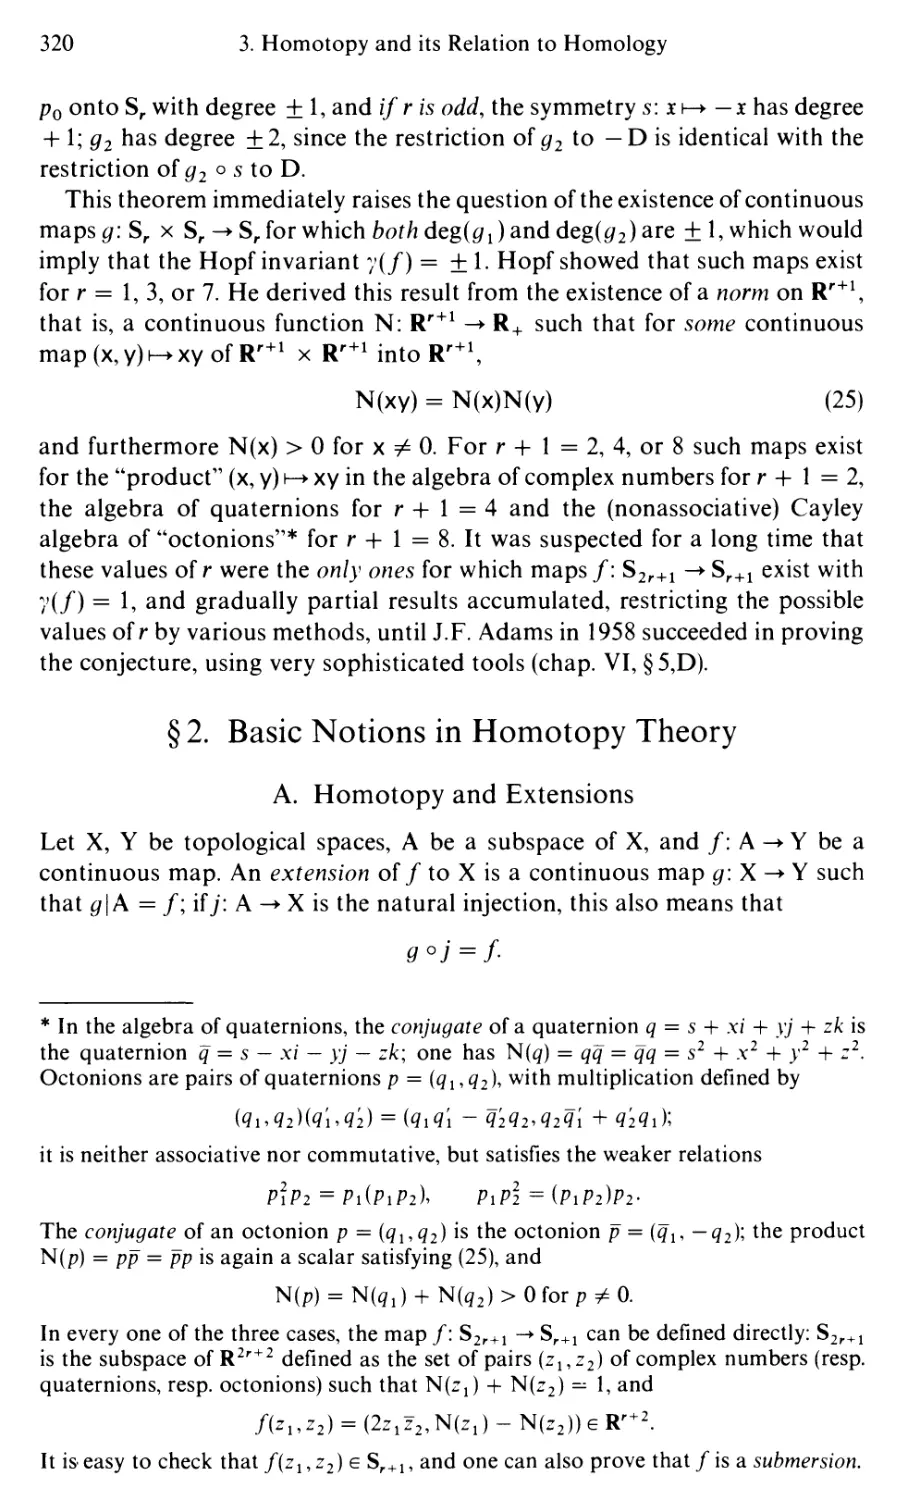 §2. Basic Notions in Homotopy Theory